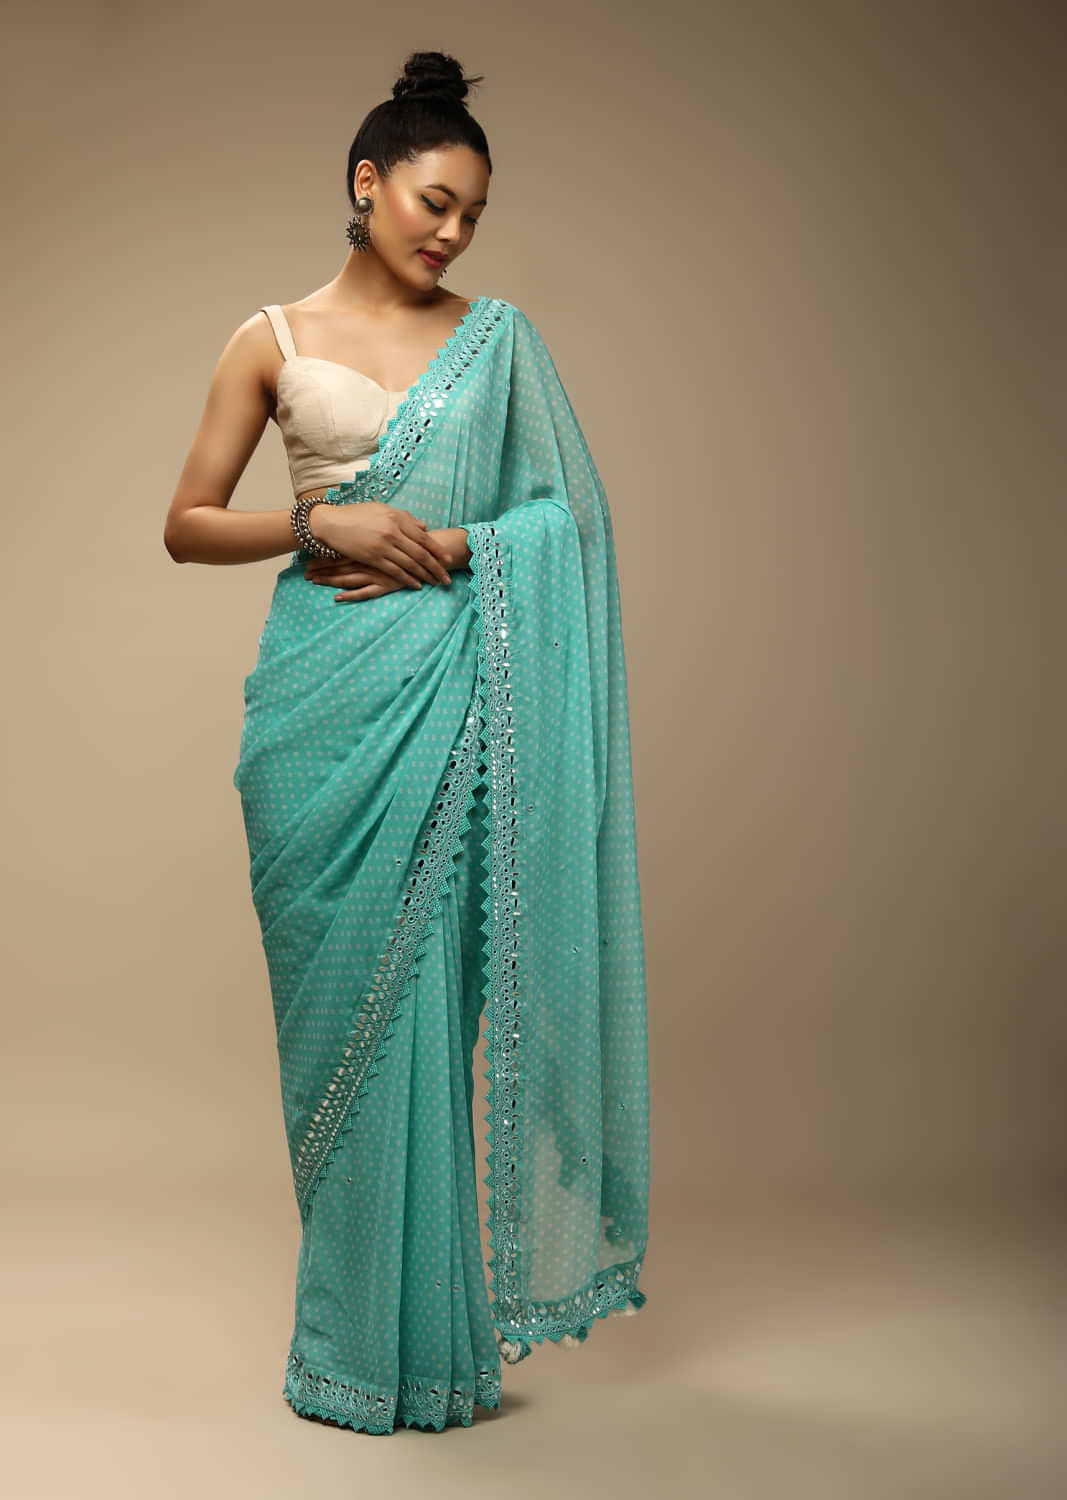 Sky Blue Bandhani Saree In Georgette With Mirror Embroidered Border